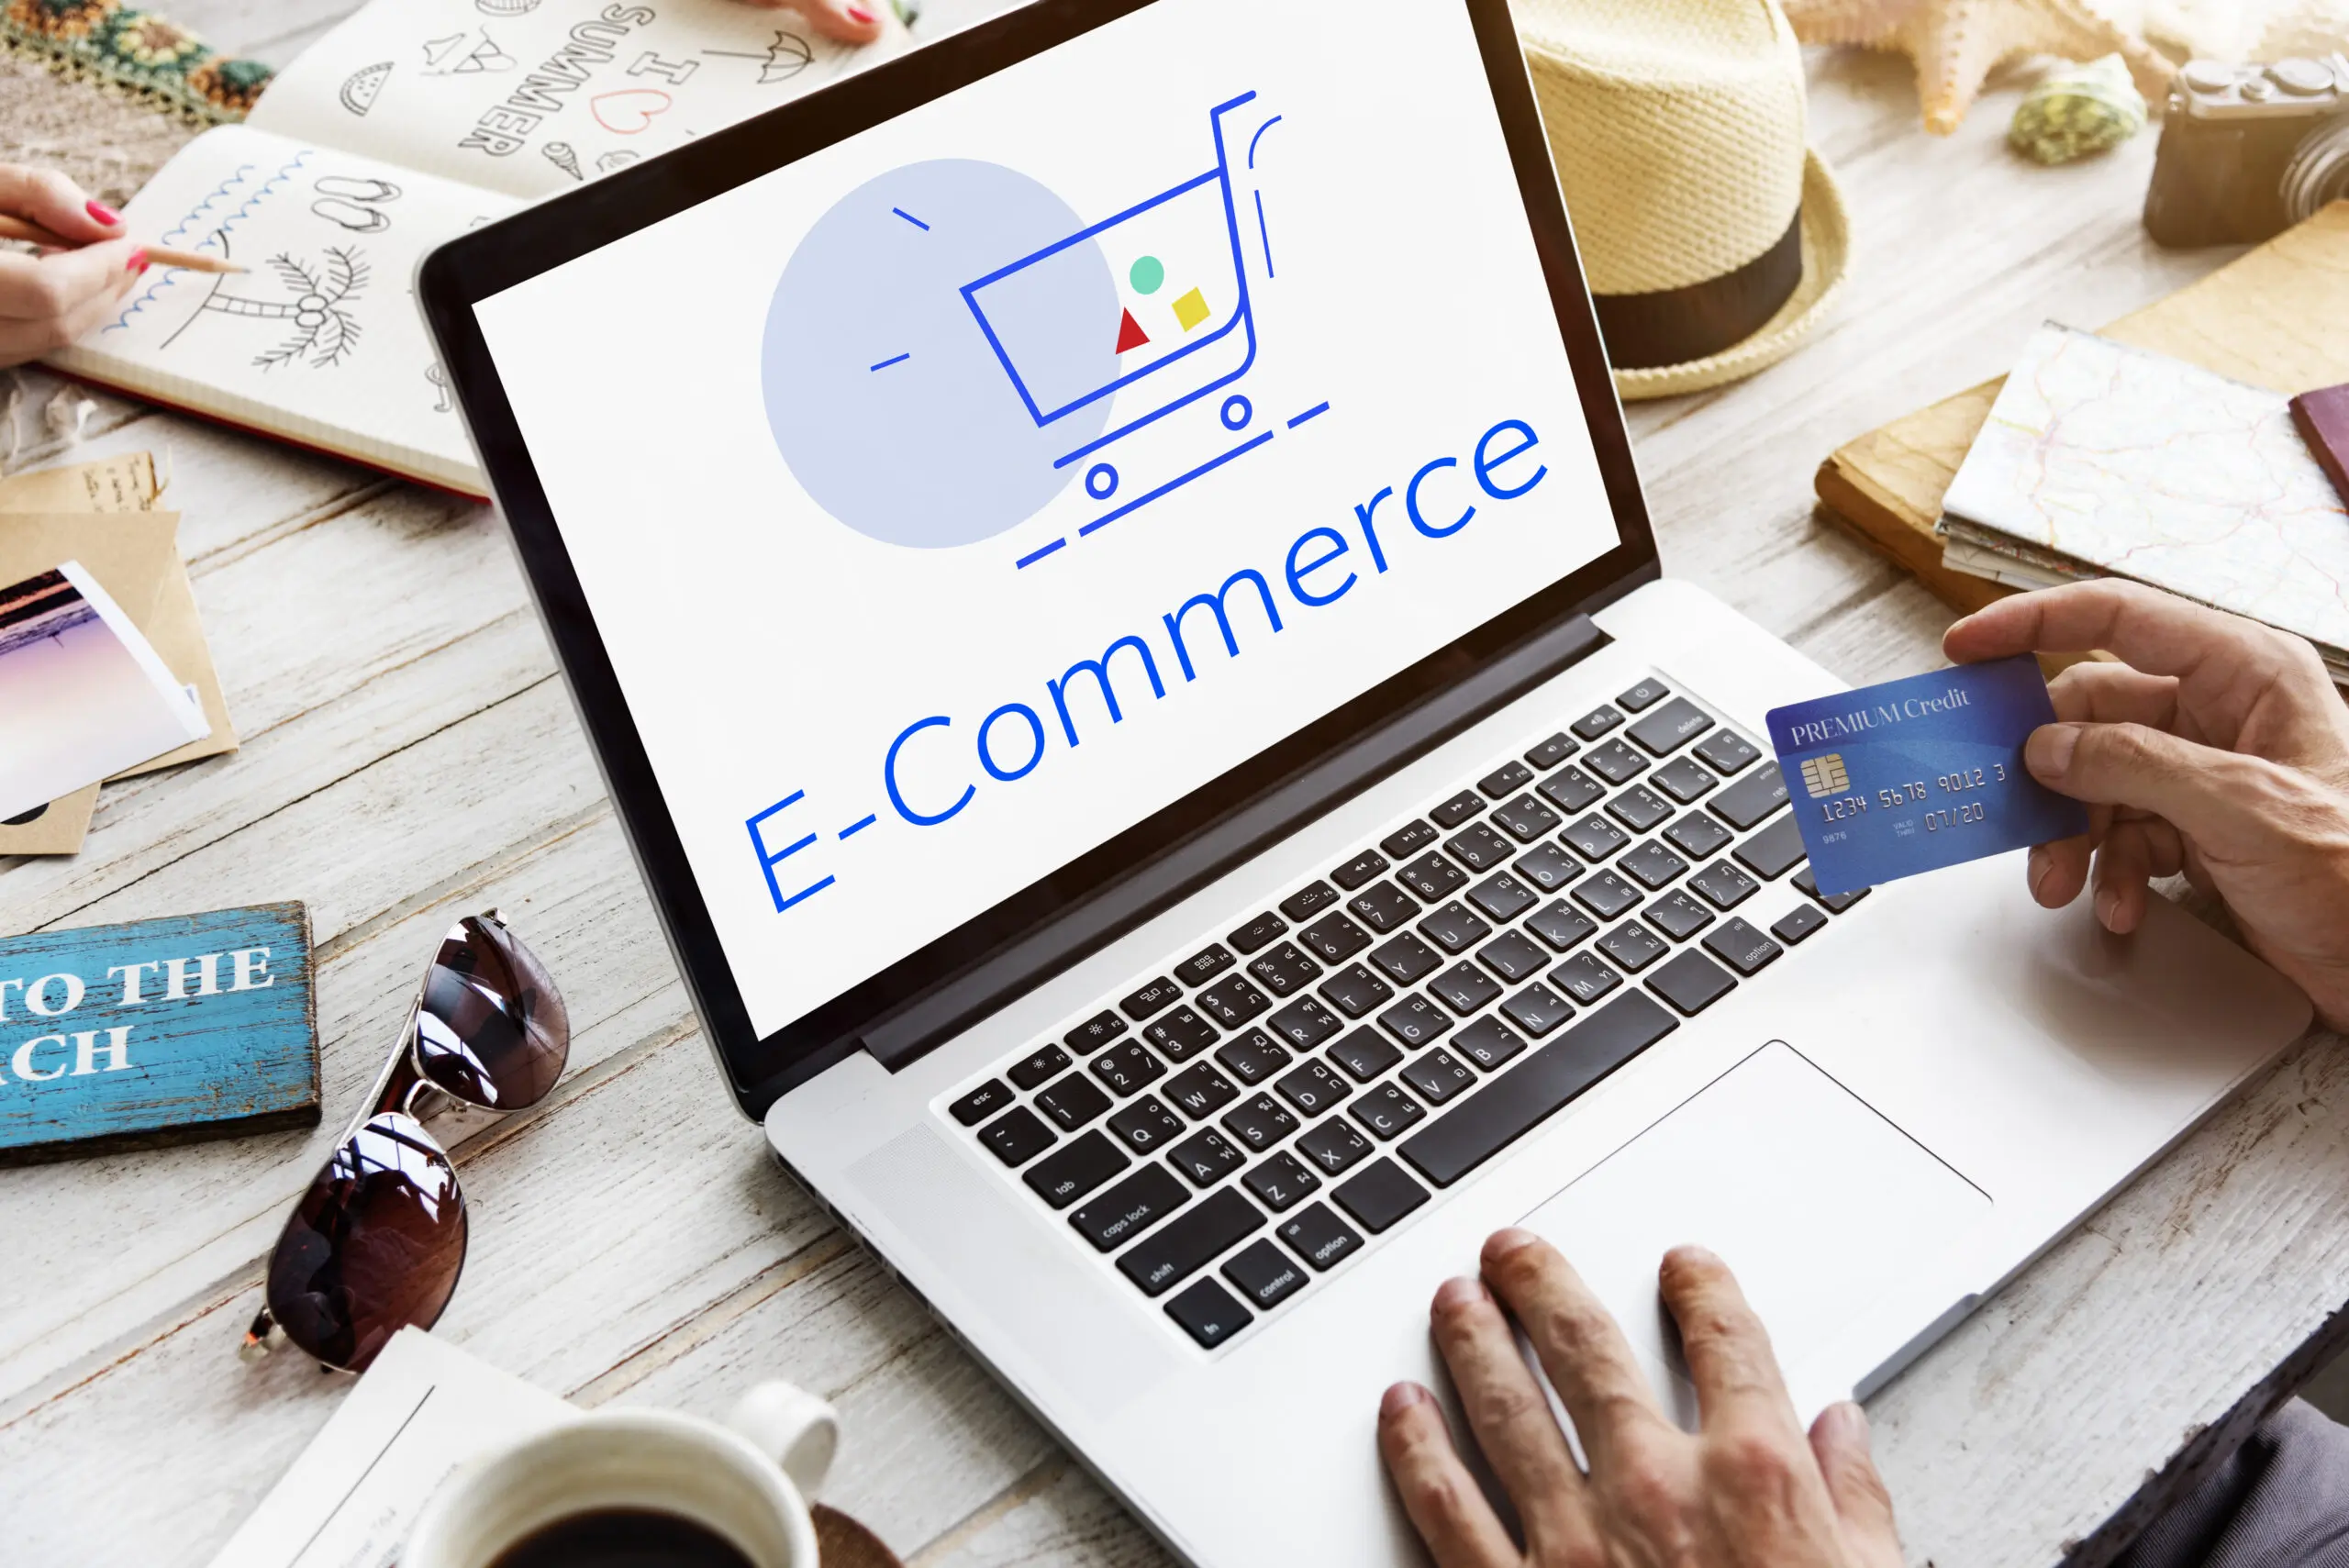 Growth Marketing Tactics for E-commerce